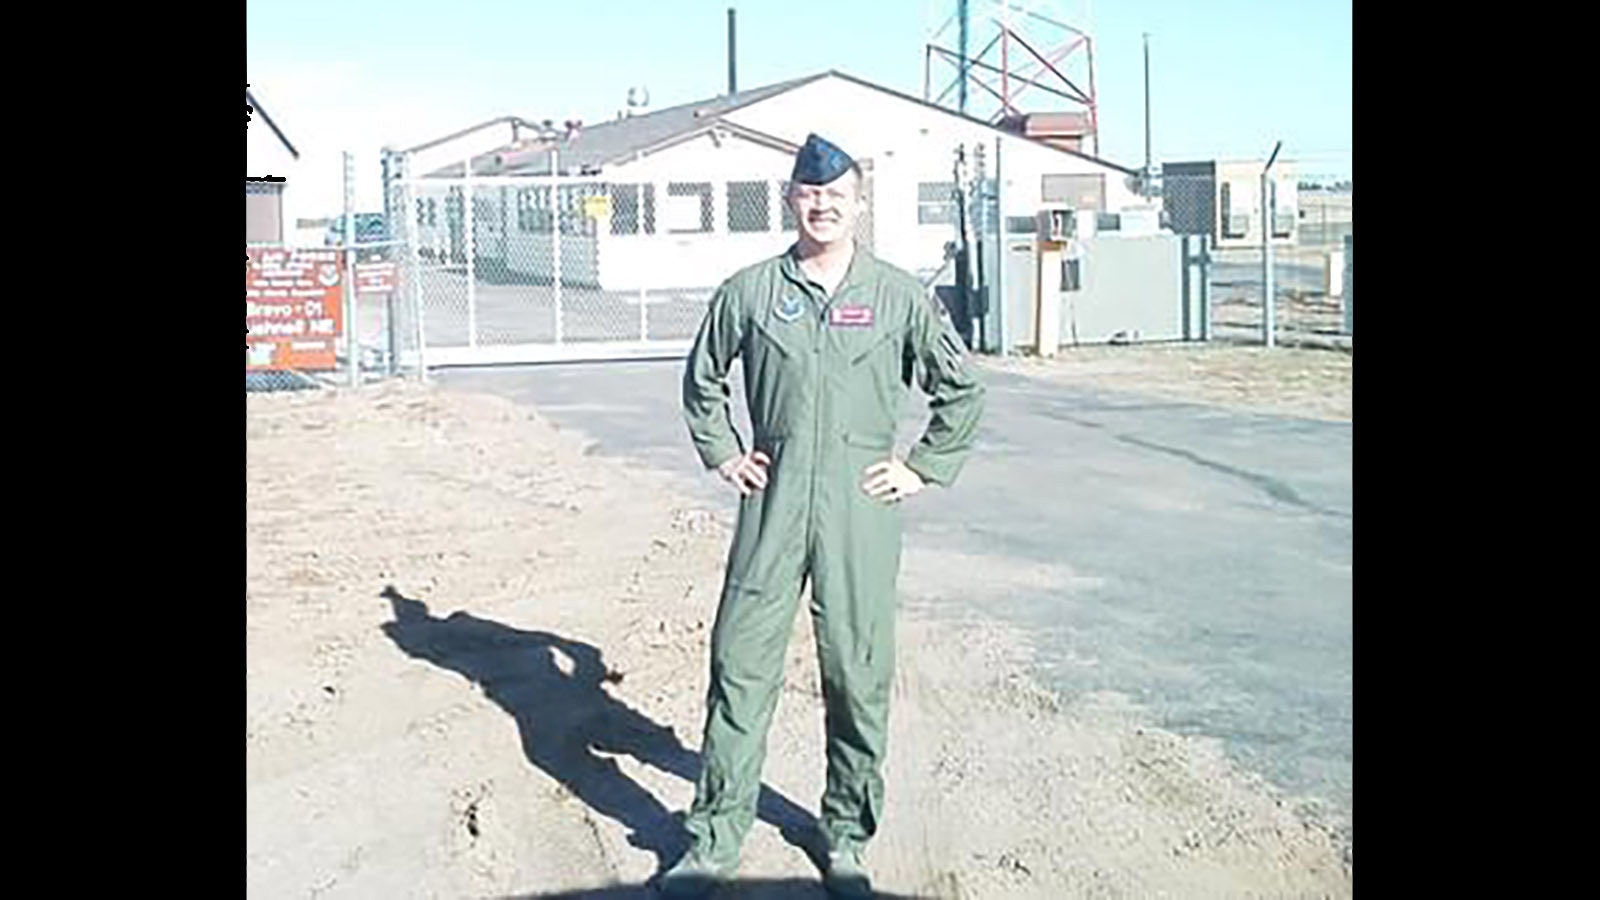 Brian Boner when he was a missileer at F.E. Warren Air Force Base.